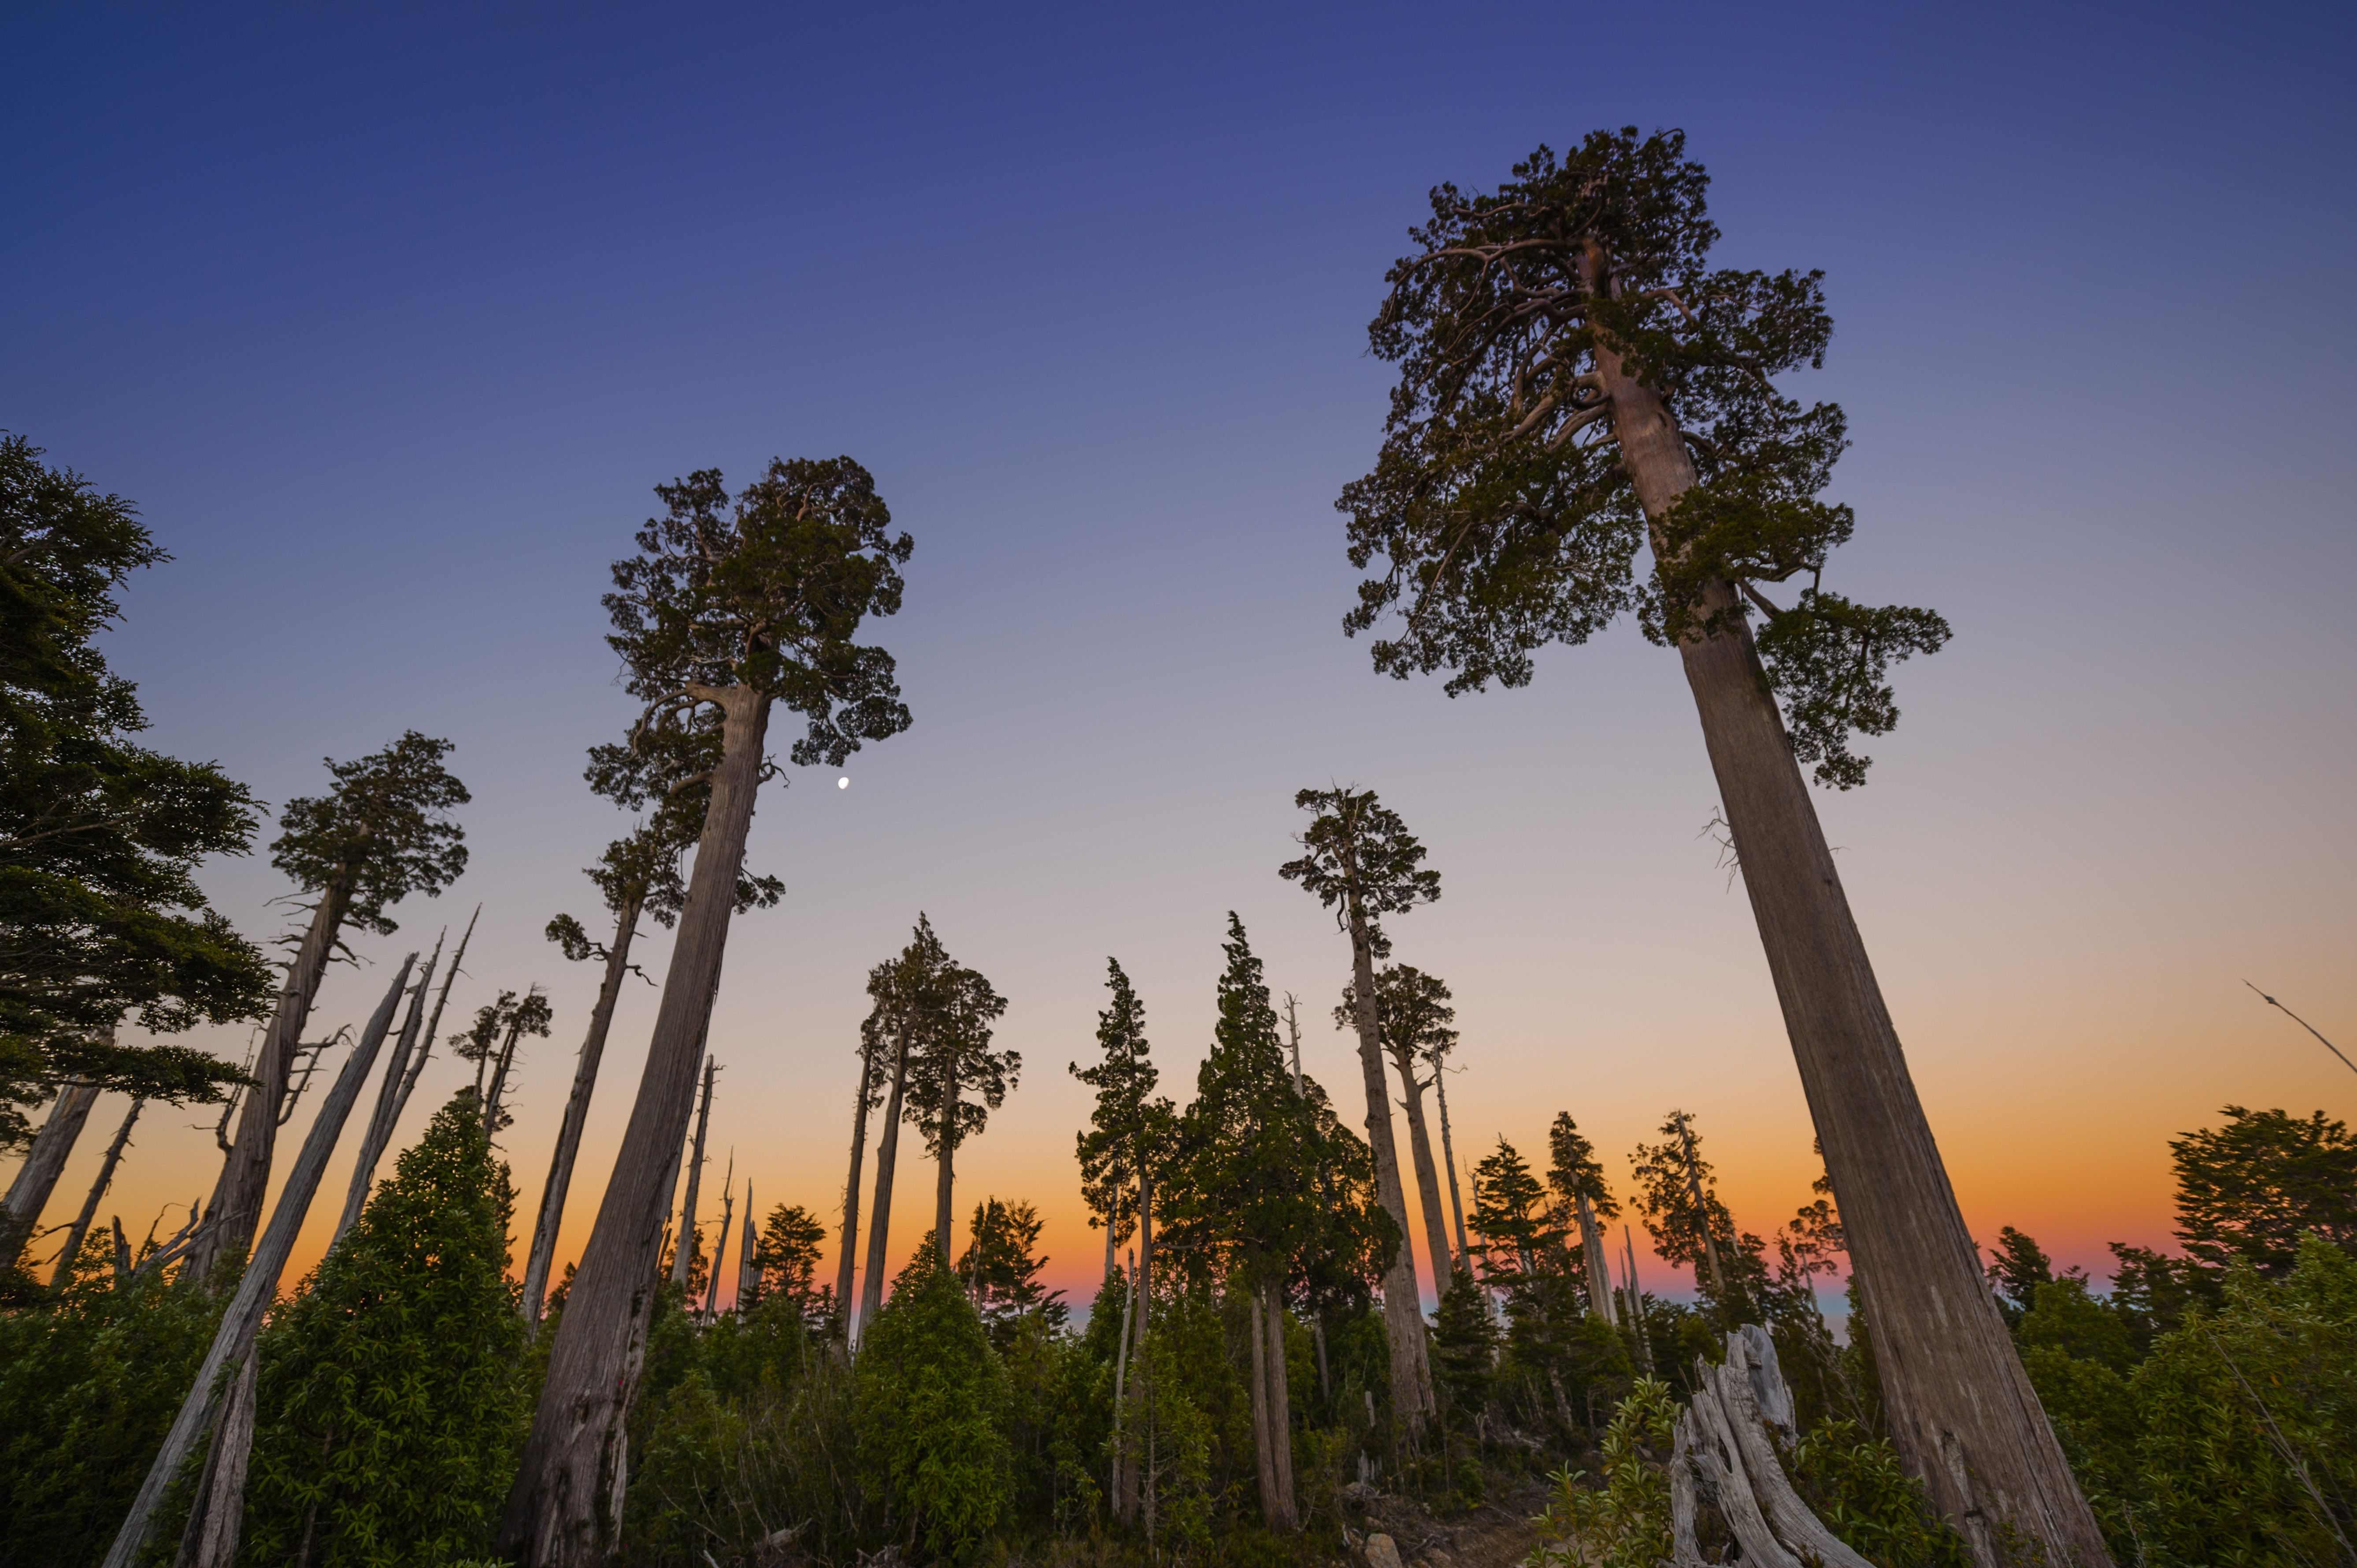 Large, coniferous trees from below at sunset.